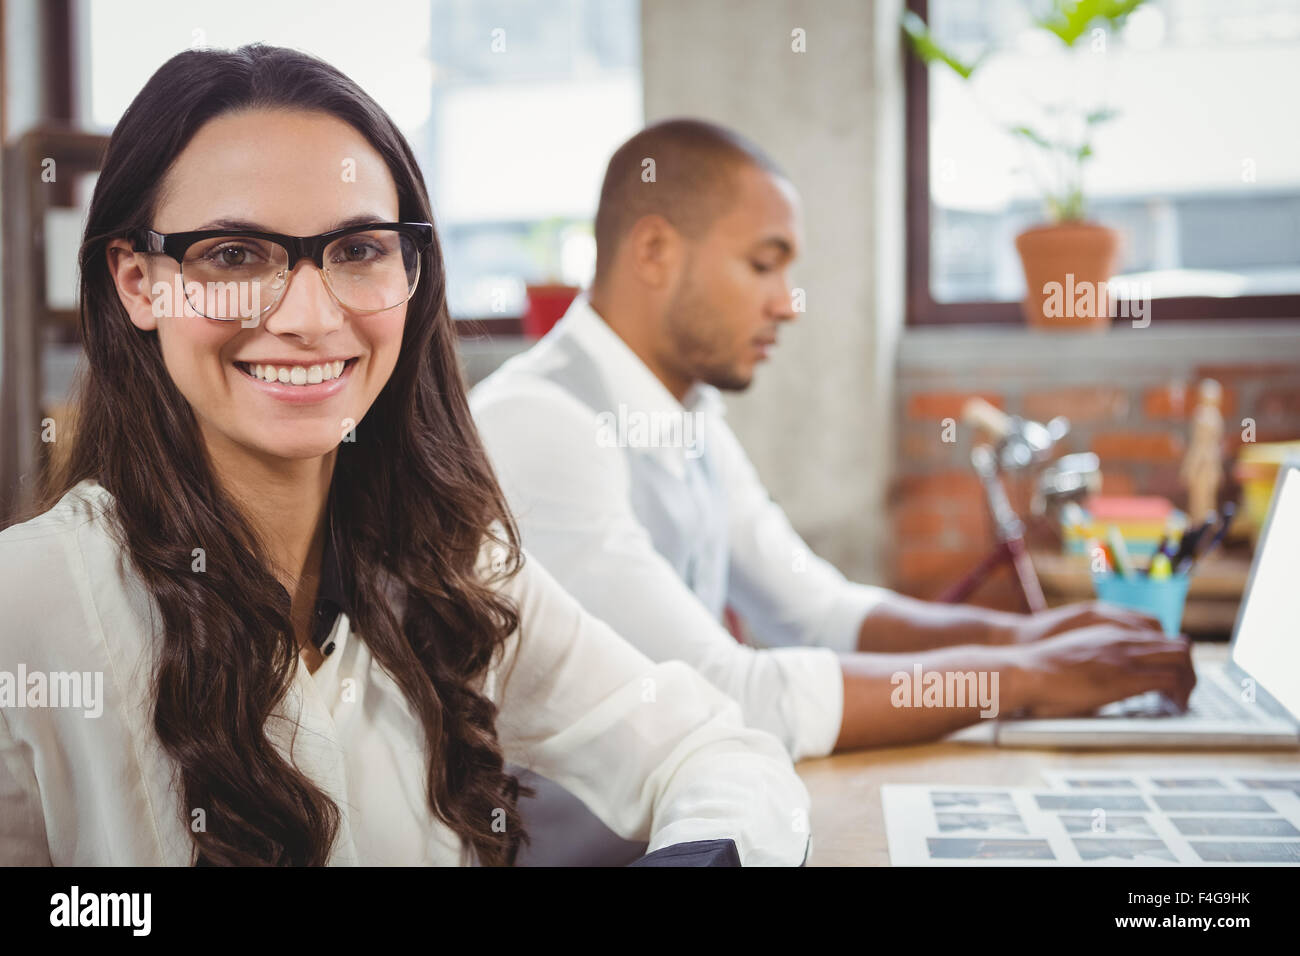 Businesswoman smiling at office Stock Photo